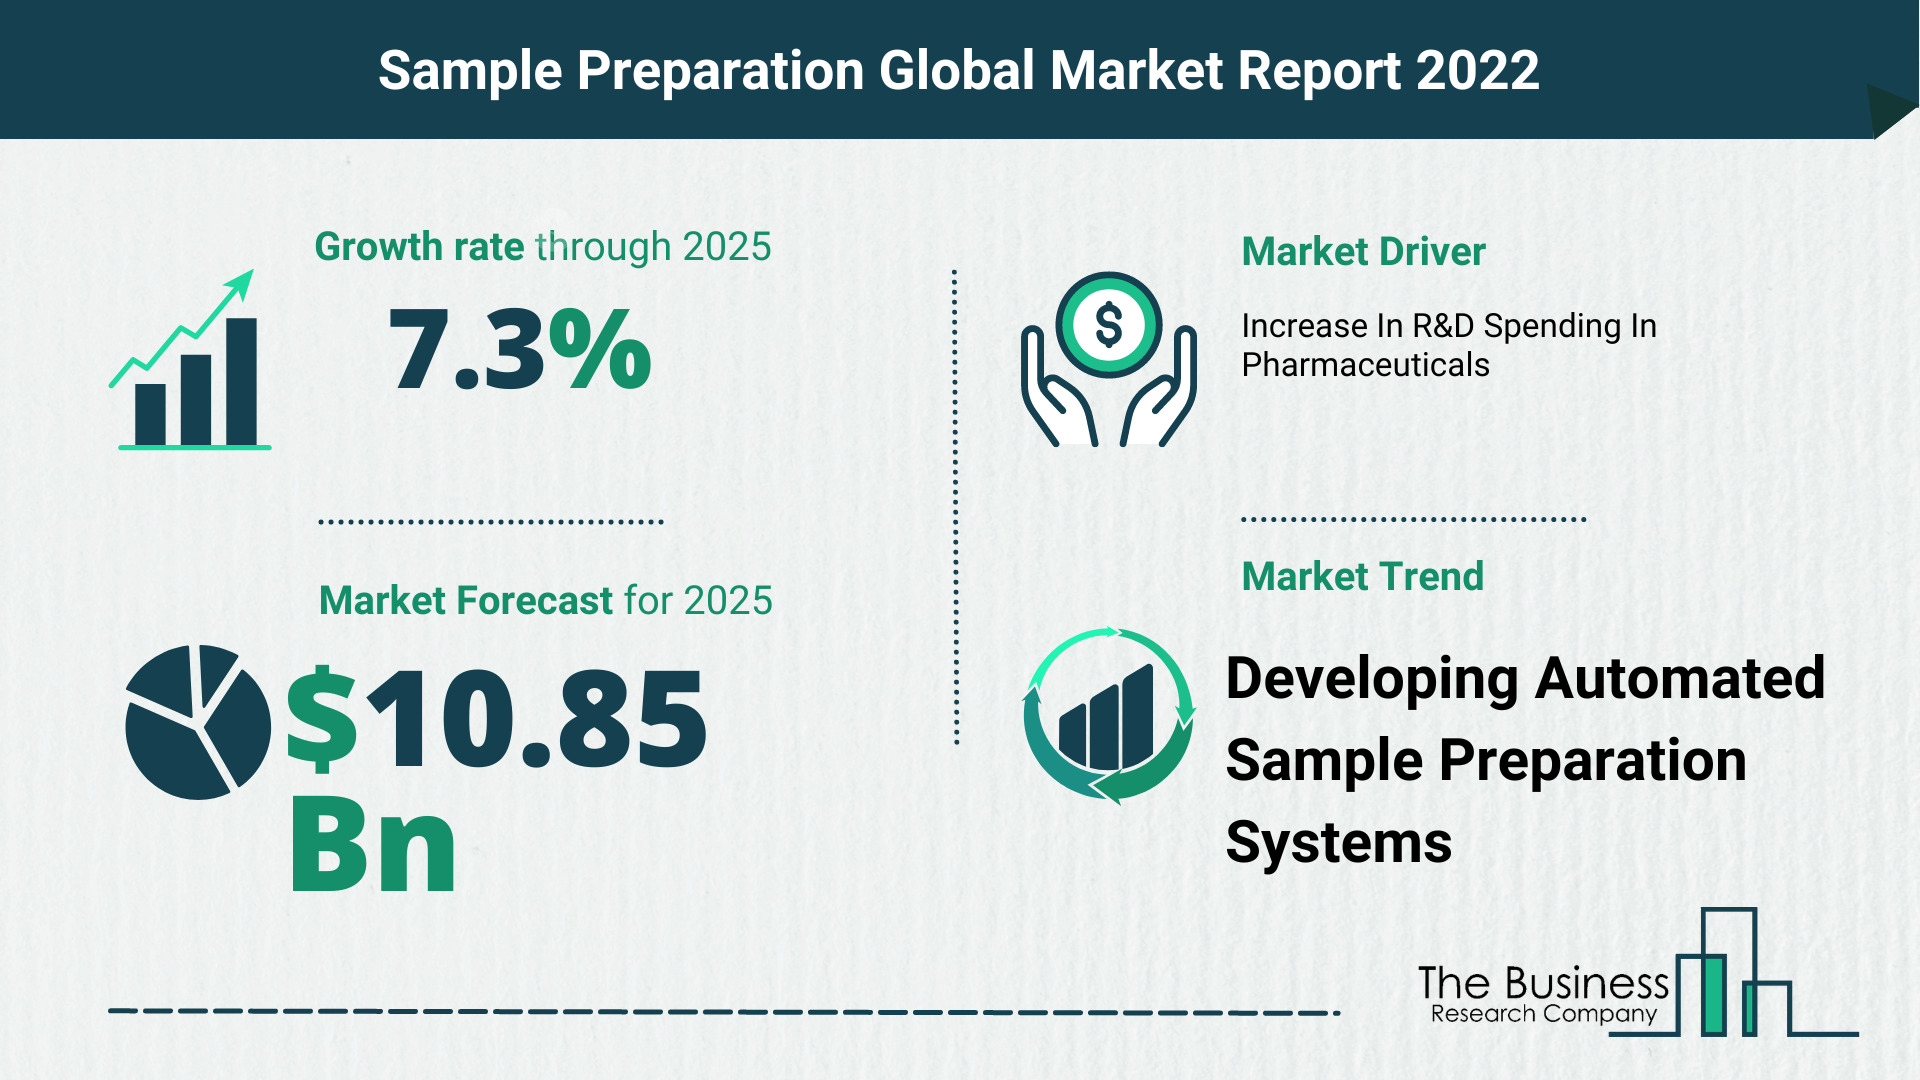 Latest Sample Preparation Market Growth Study 2022-2026 By The Business Research Company